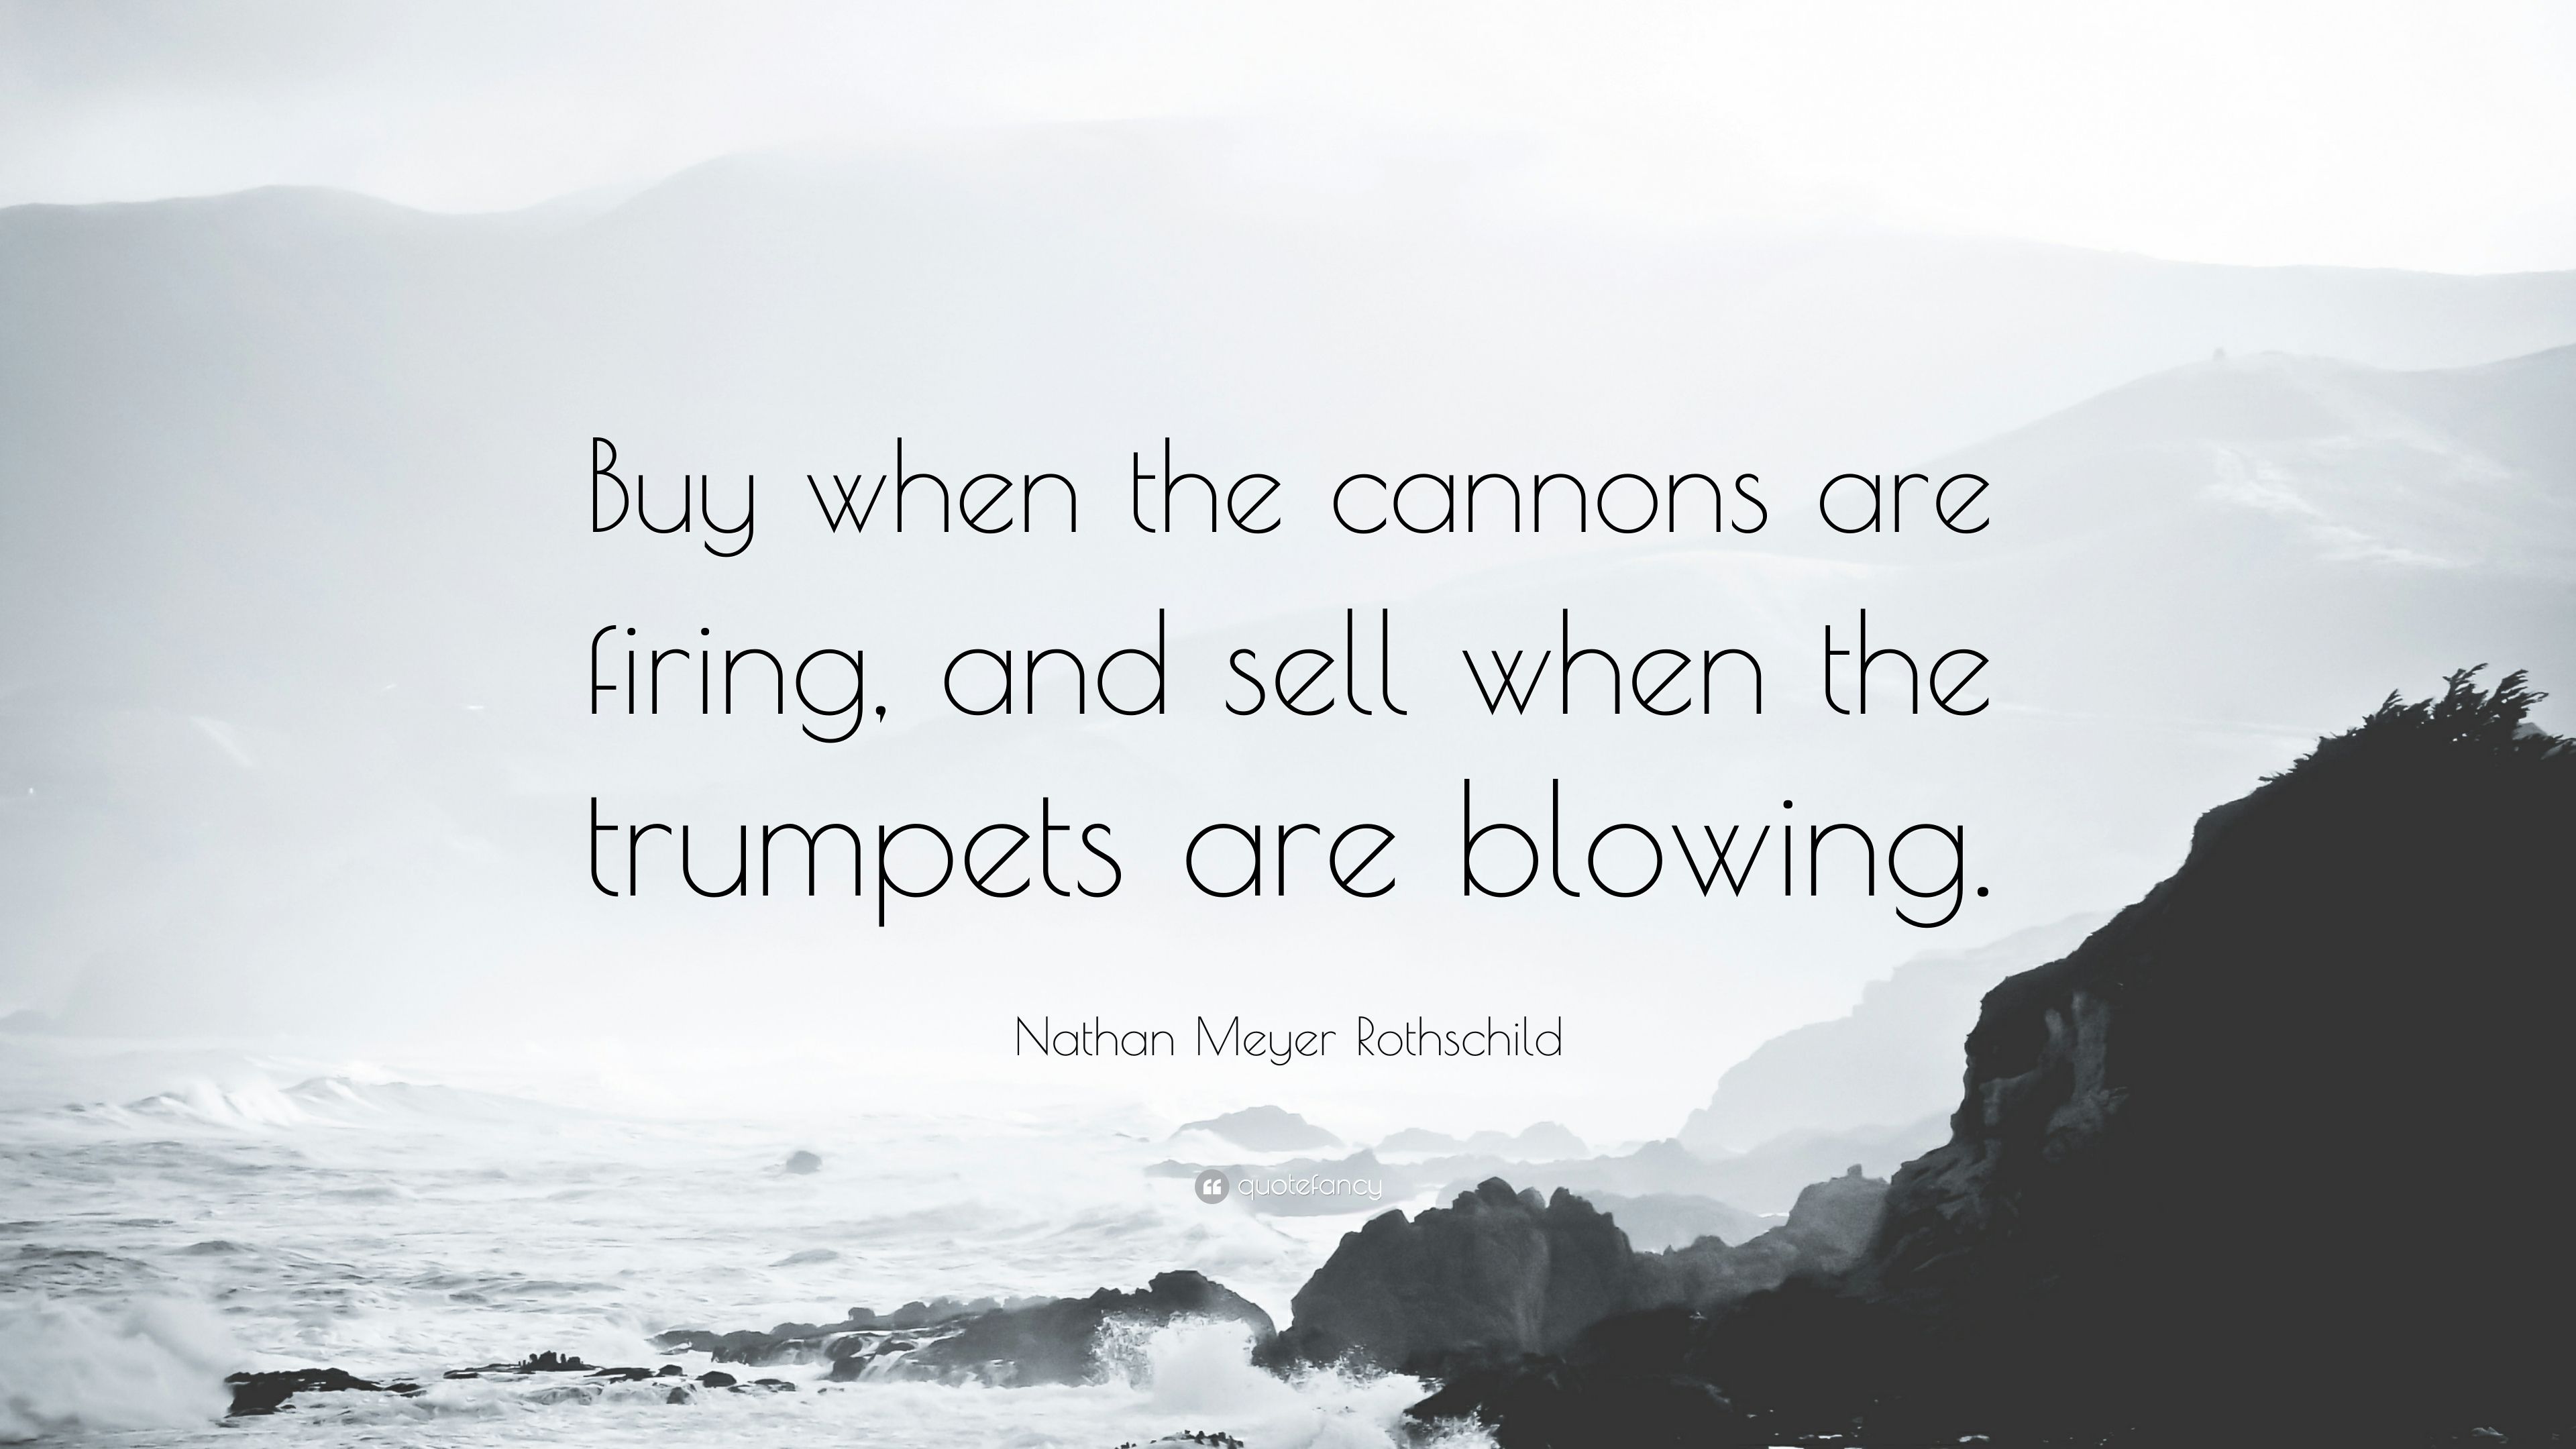 Nathan Meyer Rothschild Quote: “Buy when the cannons are firing, and sell when the trumpets are blowing.” (9 wallpaper)